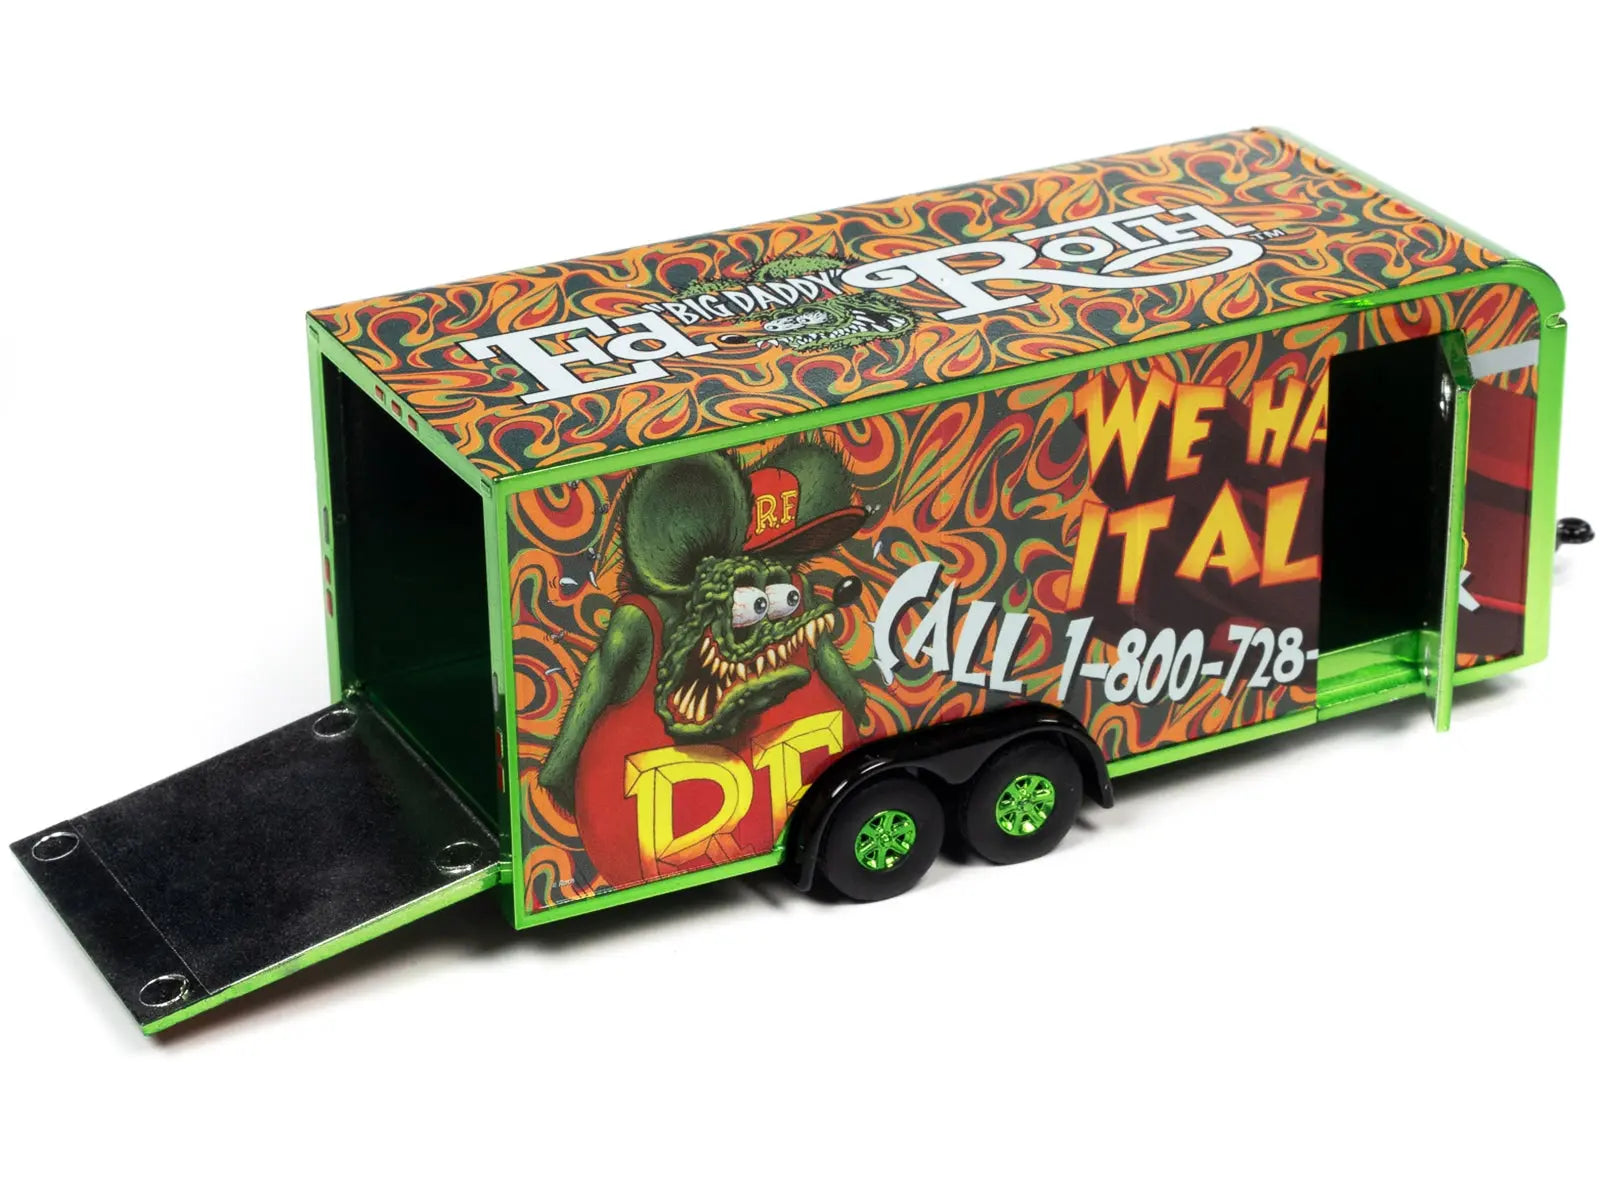 4-Wheel Enclosed Car Trailer Green with Graphics "Rat Fink: We Haul it All!" 1/64 Diecast Model by Auto World Autoworld